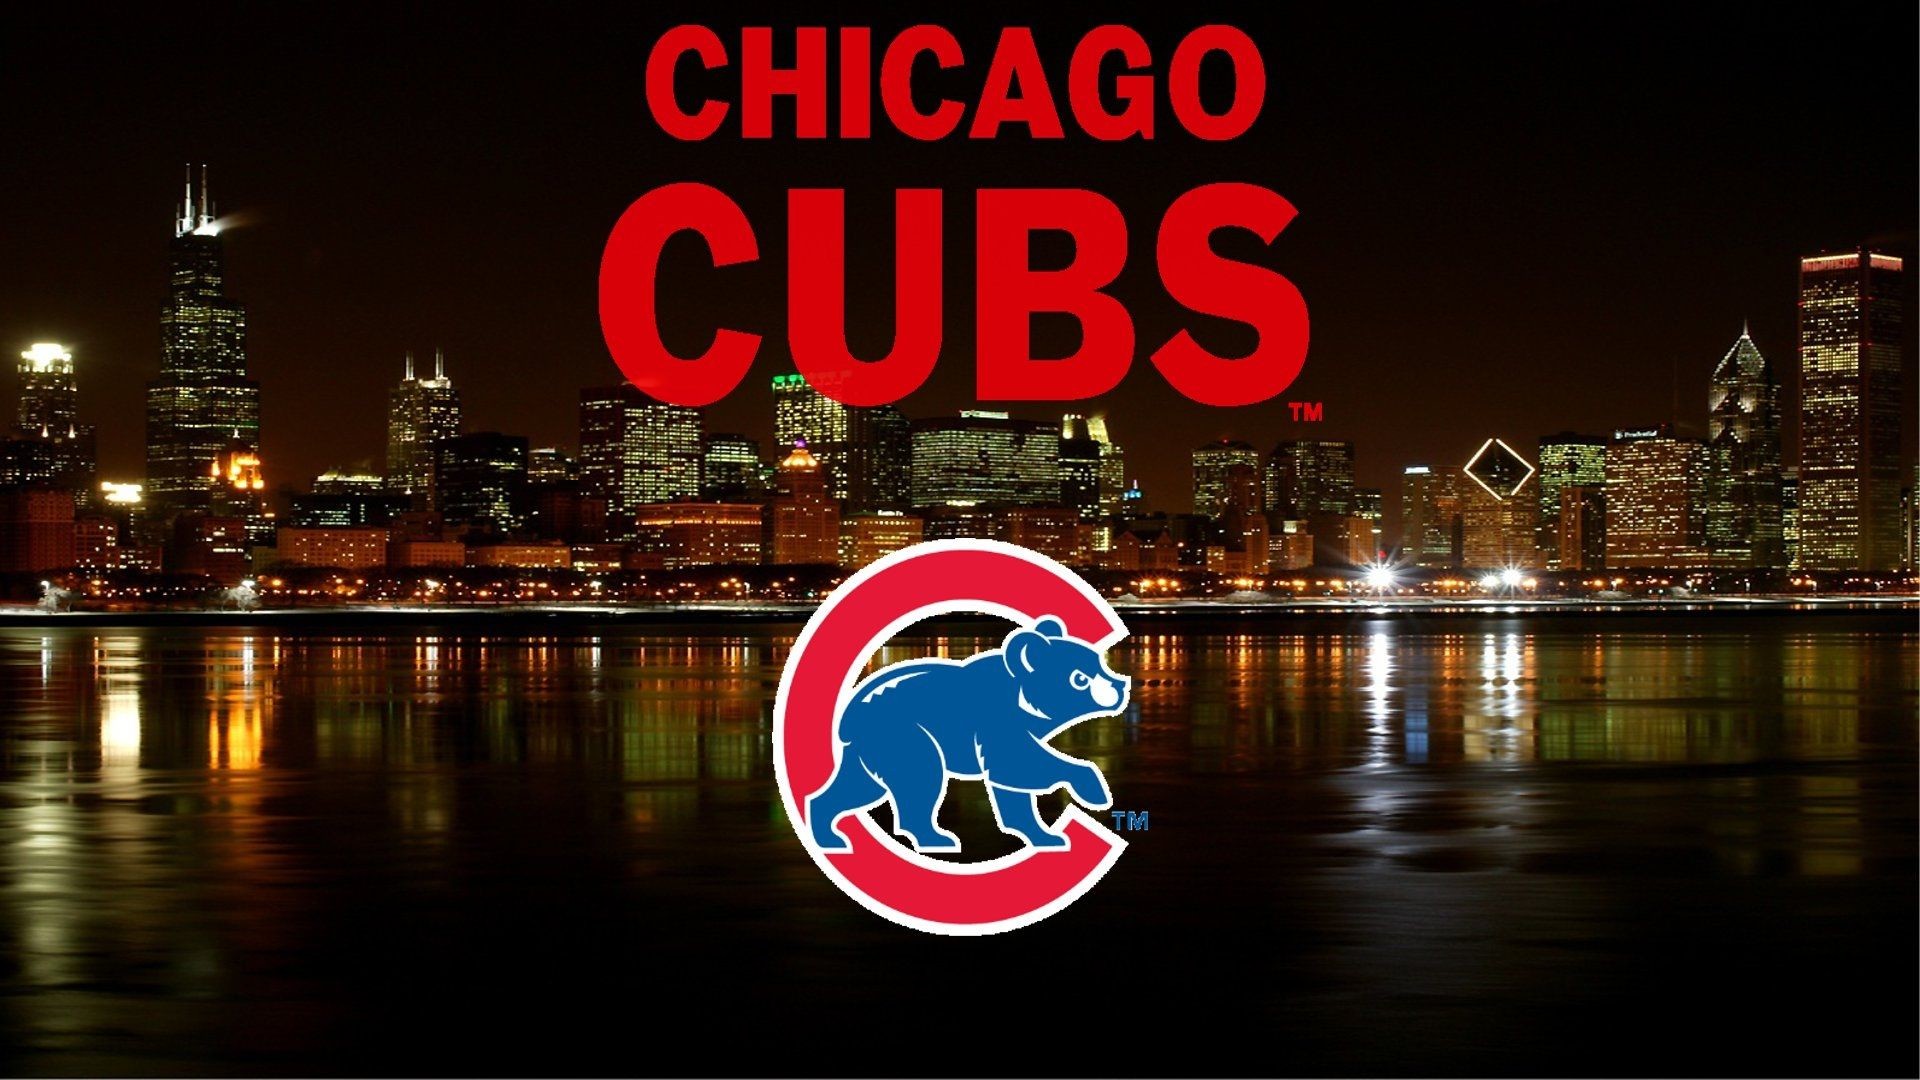 This Evening The Chicago Cubs Will Be Playing The St 1920x1080